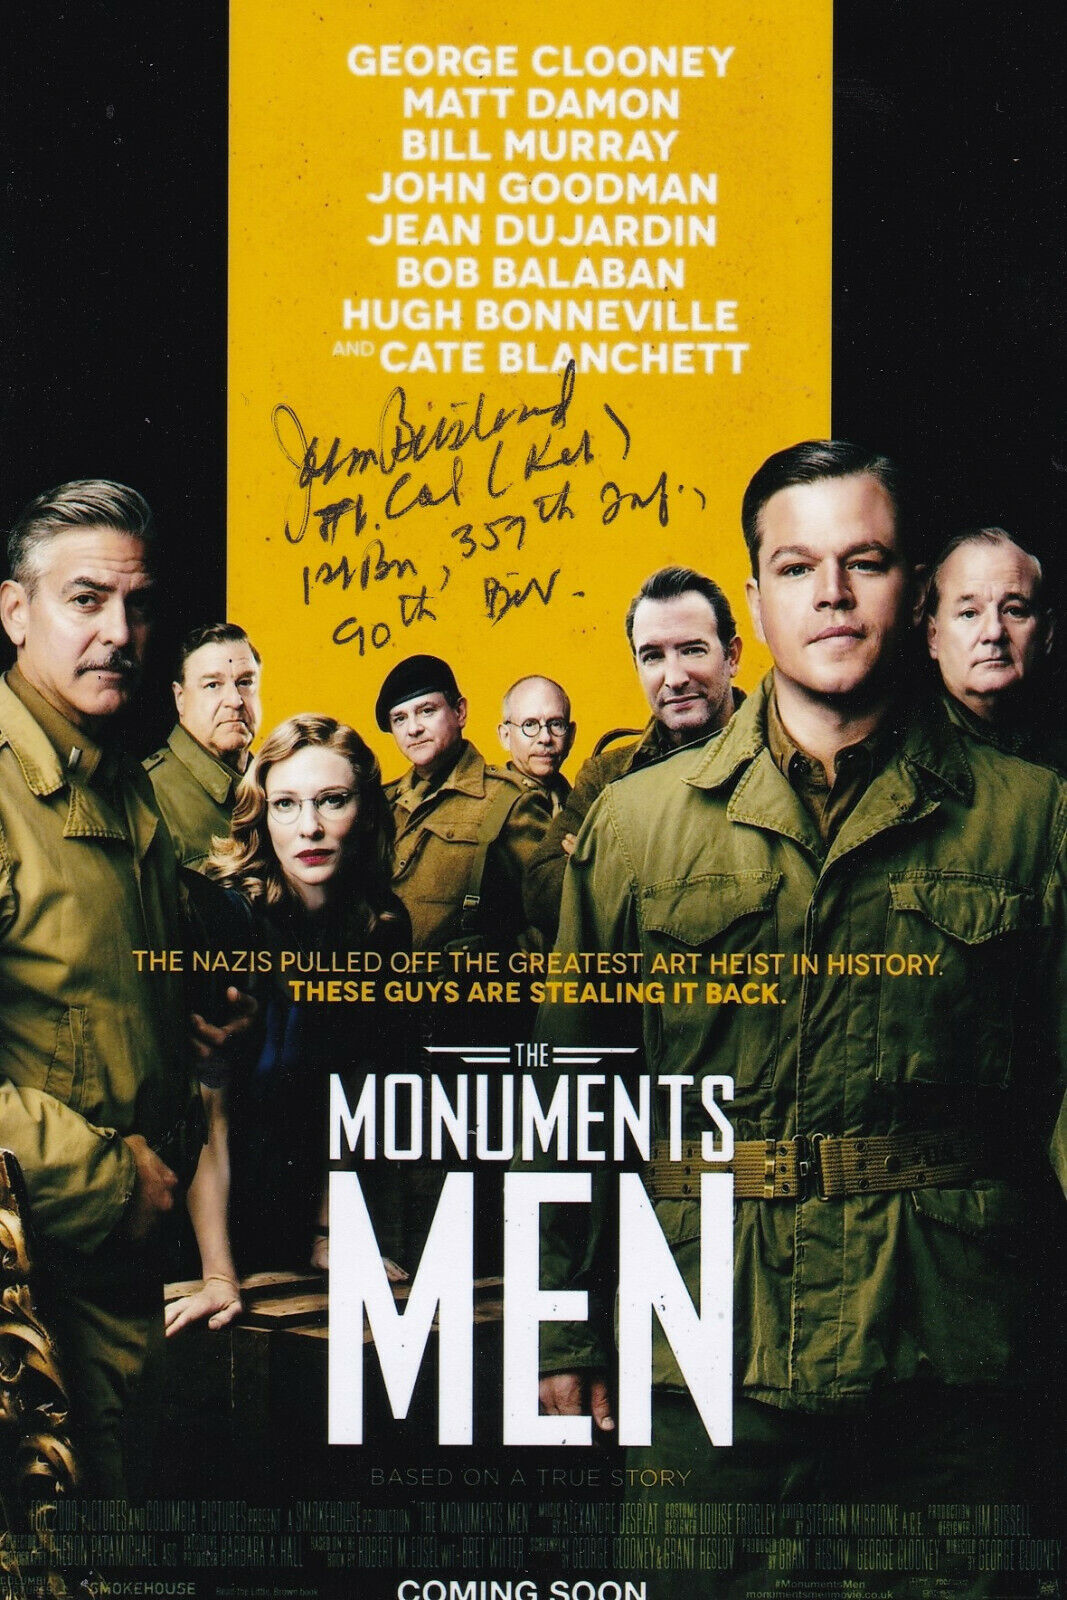 Lt. Col John Busterud Signed 4x6 Inch Photo Poster painting 90th Infantry Division Monuments Men